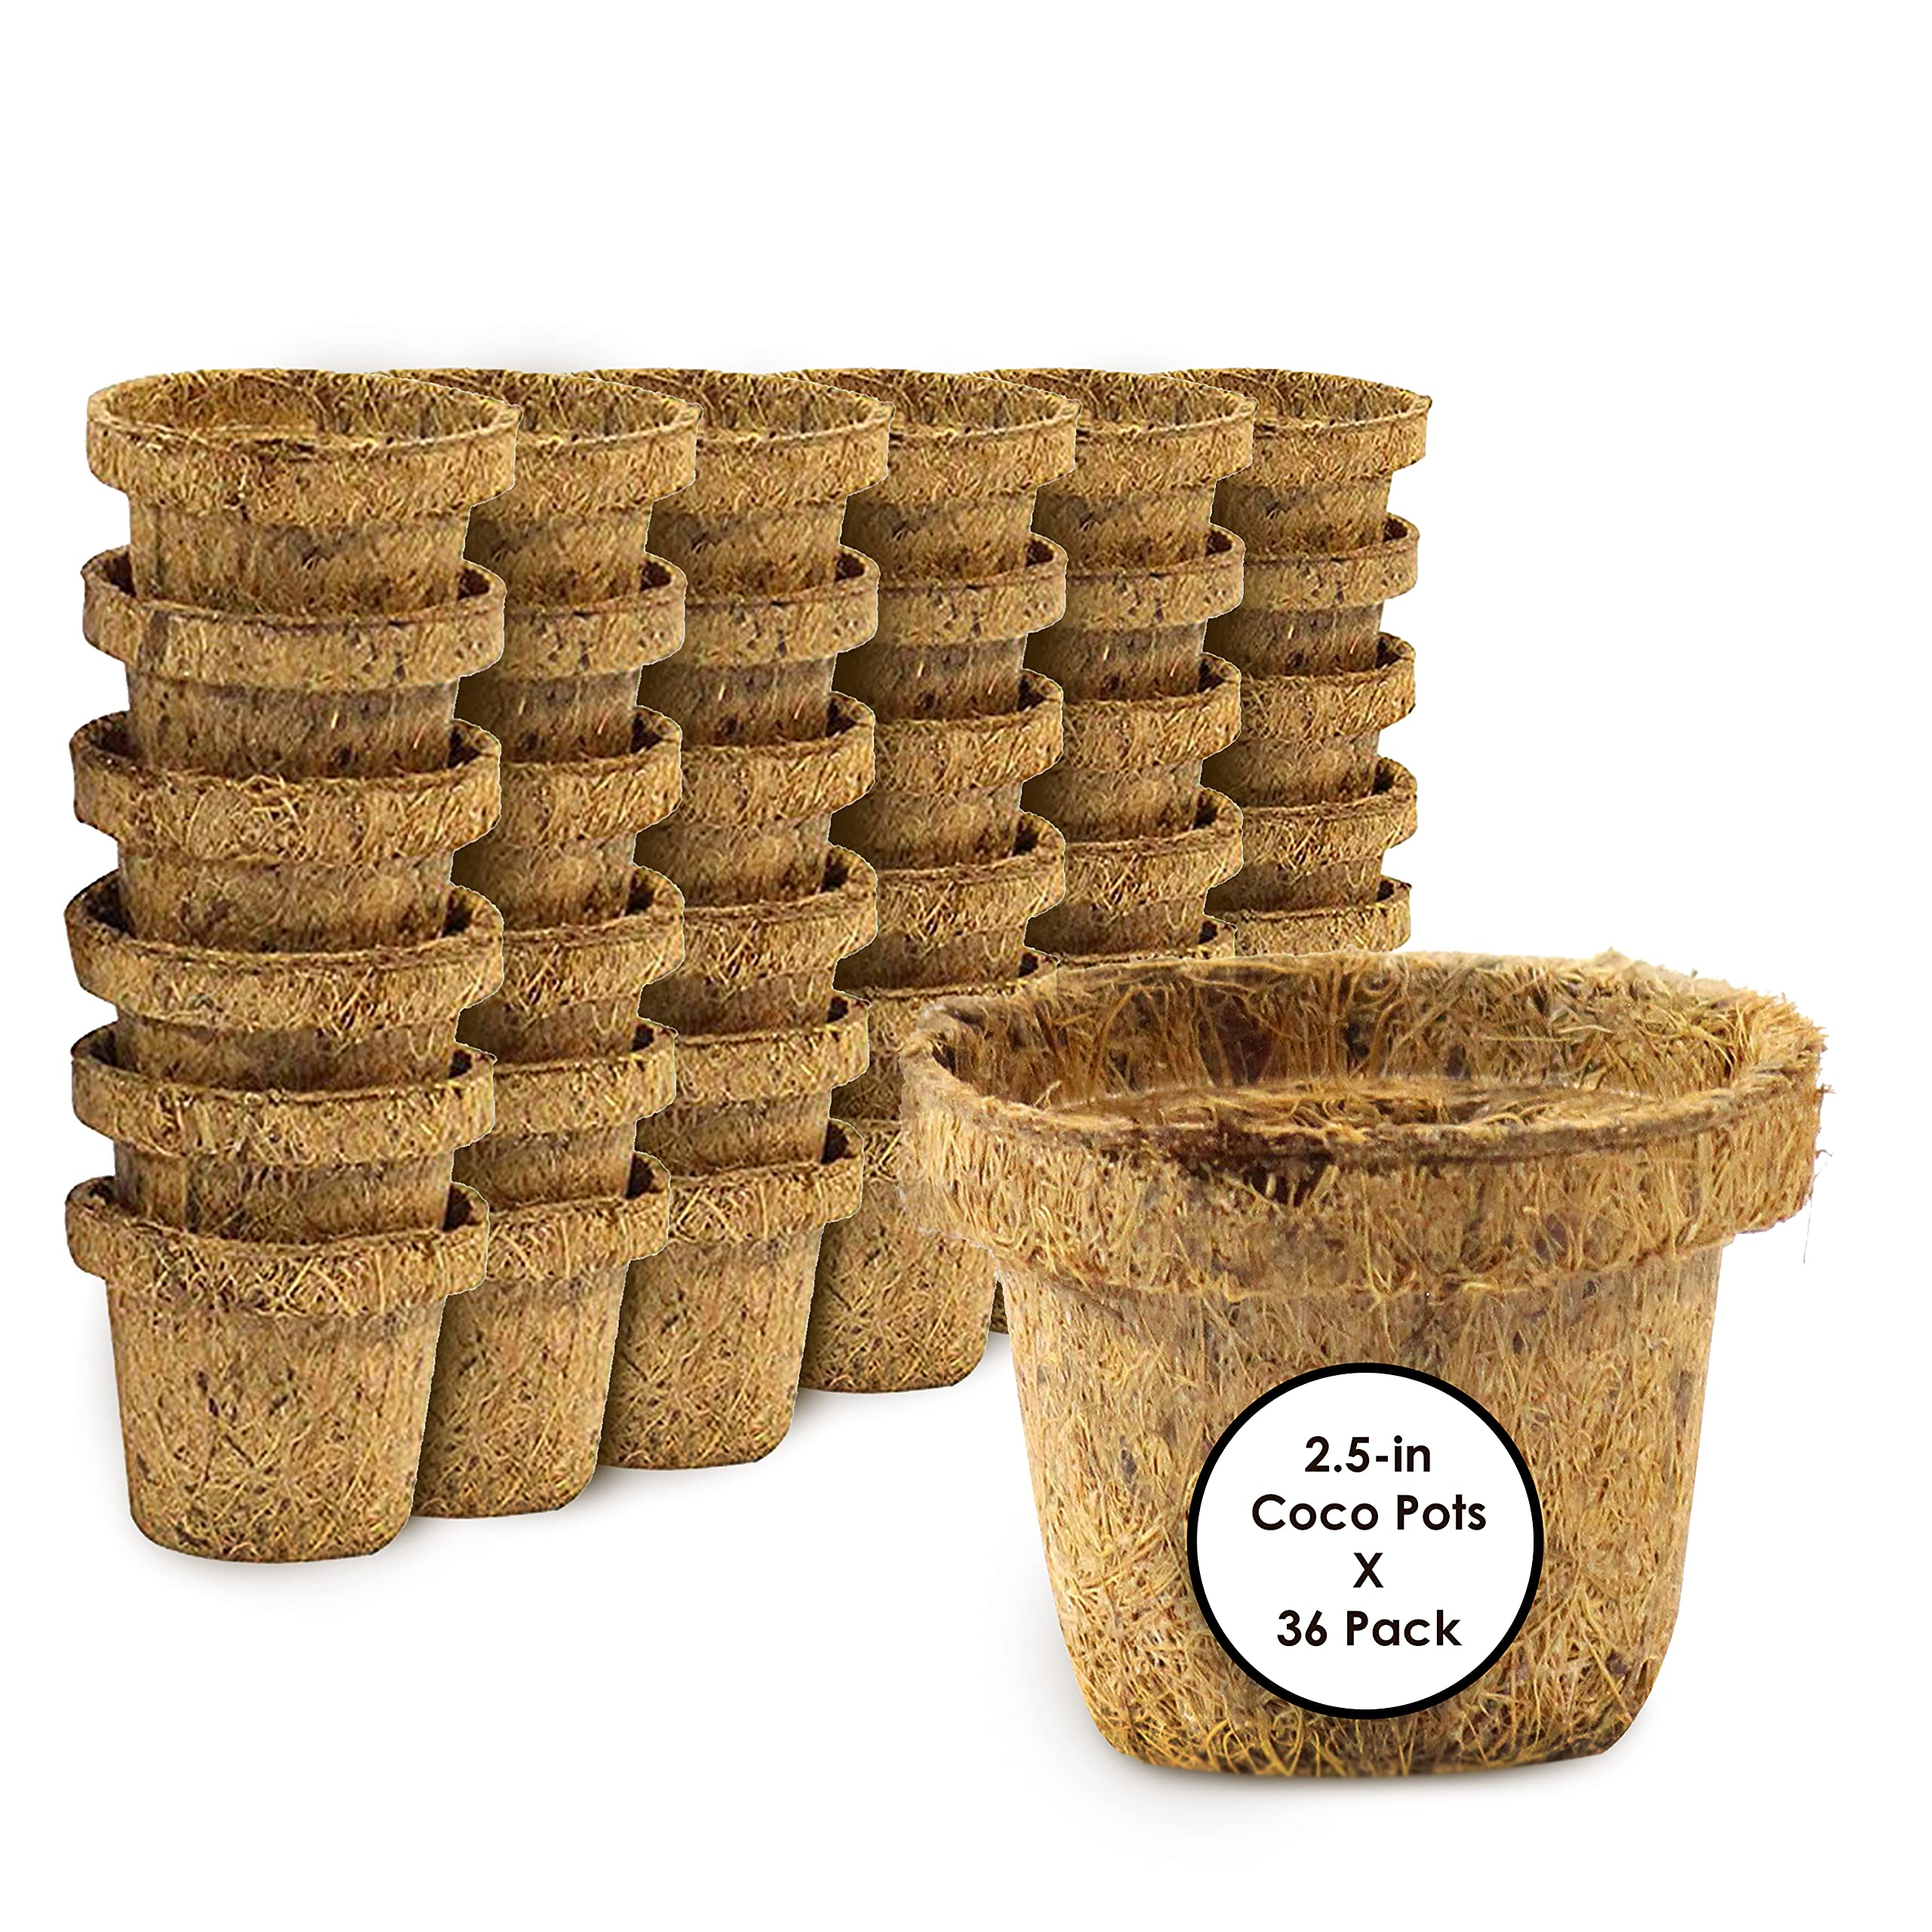 Coco Grow Cups 6 in. Coir Planter Pots (5-Pack)